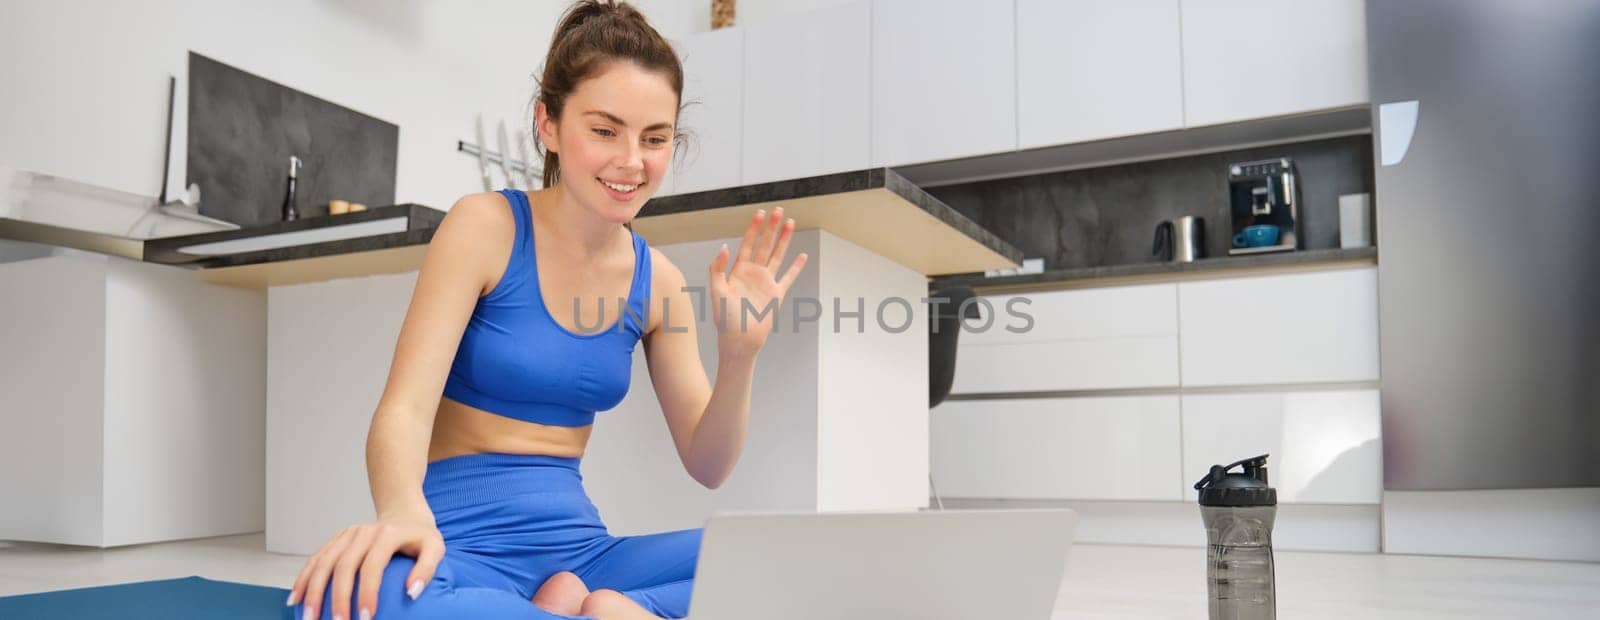 Portrait of fitness instructor, woman connects to online training session, waves hand at laptop, teaching yoga workout from home, sitting on rubber mat.